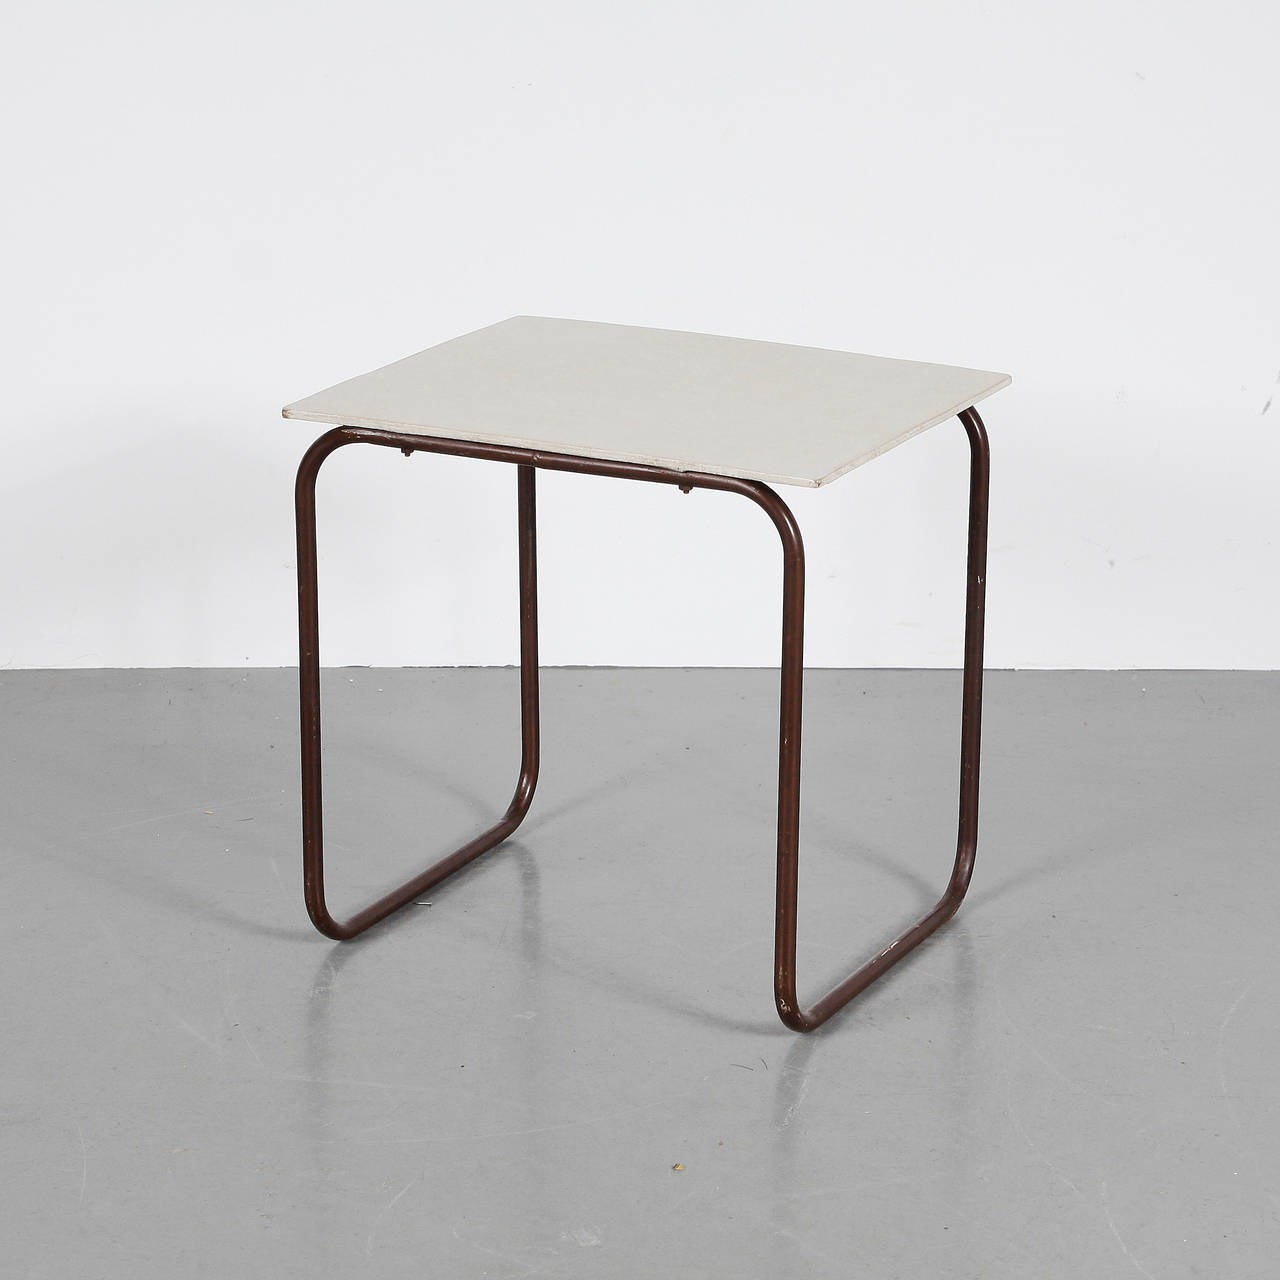 Side table manufactured in the Netherlands, circa 1950.
Lacquered wood top in original condition with tubular metal frame.

We offer free shipping for this piece.